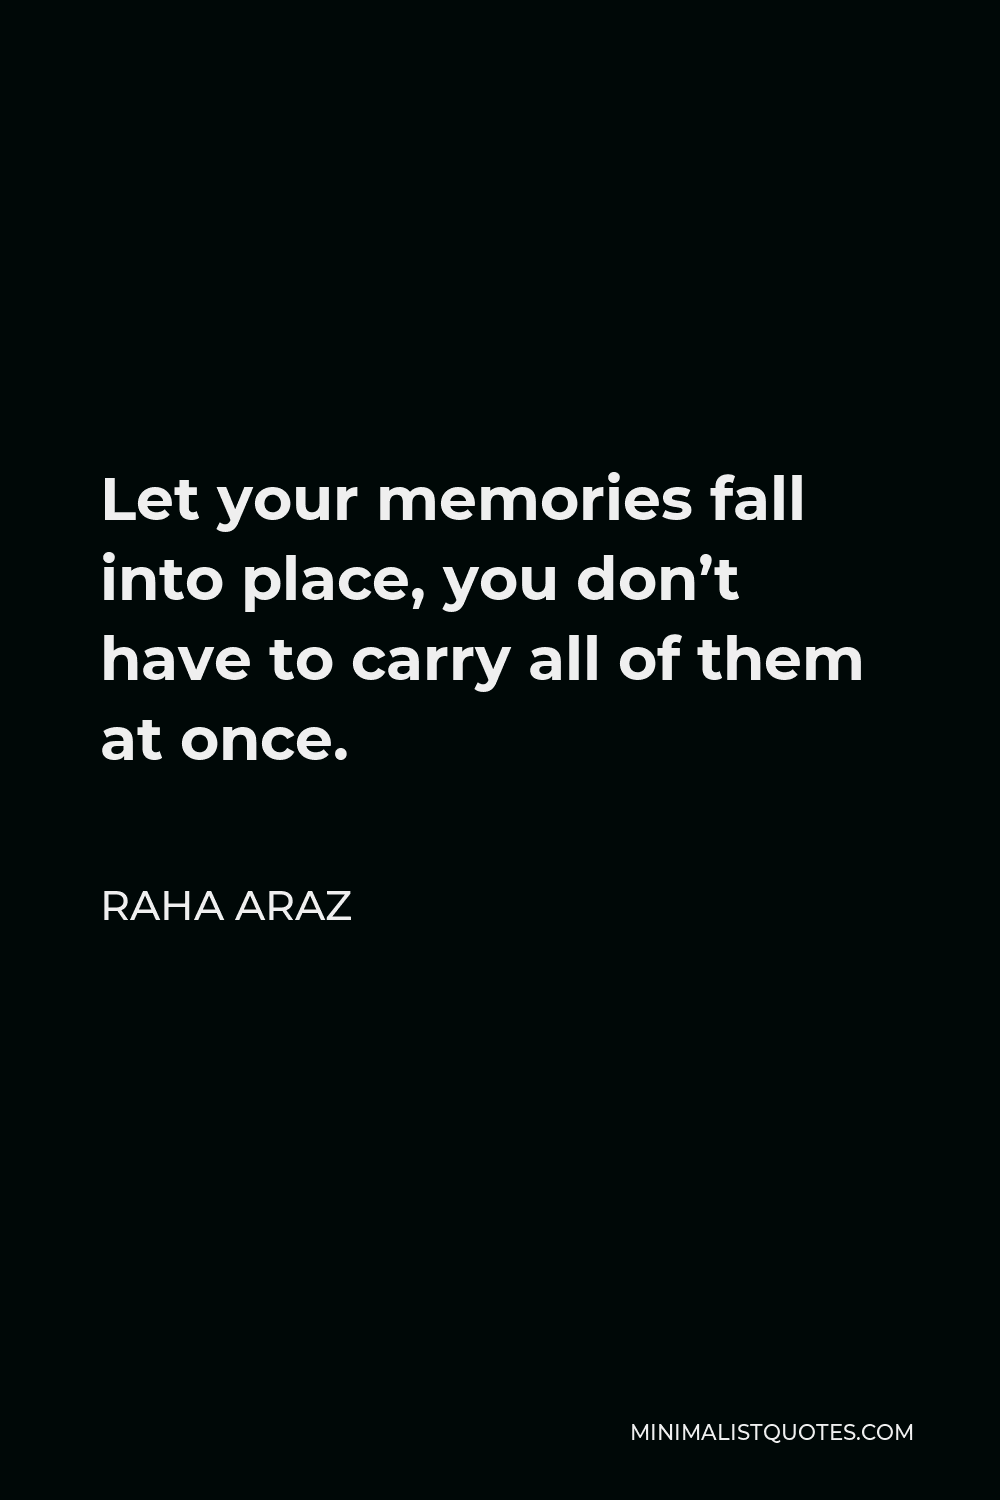 Raha Araz Quote - Let your memories fall into place, you don’t have to carry all of them at once.